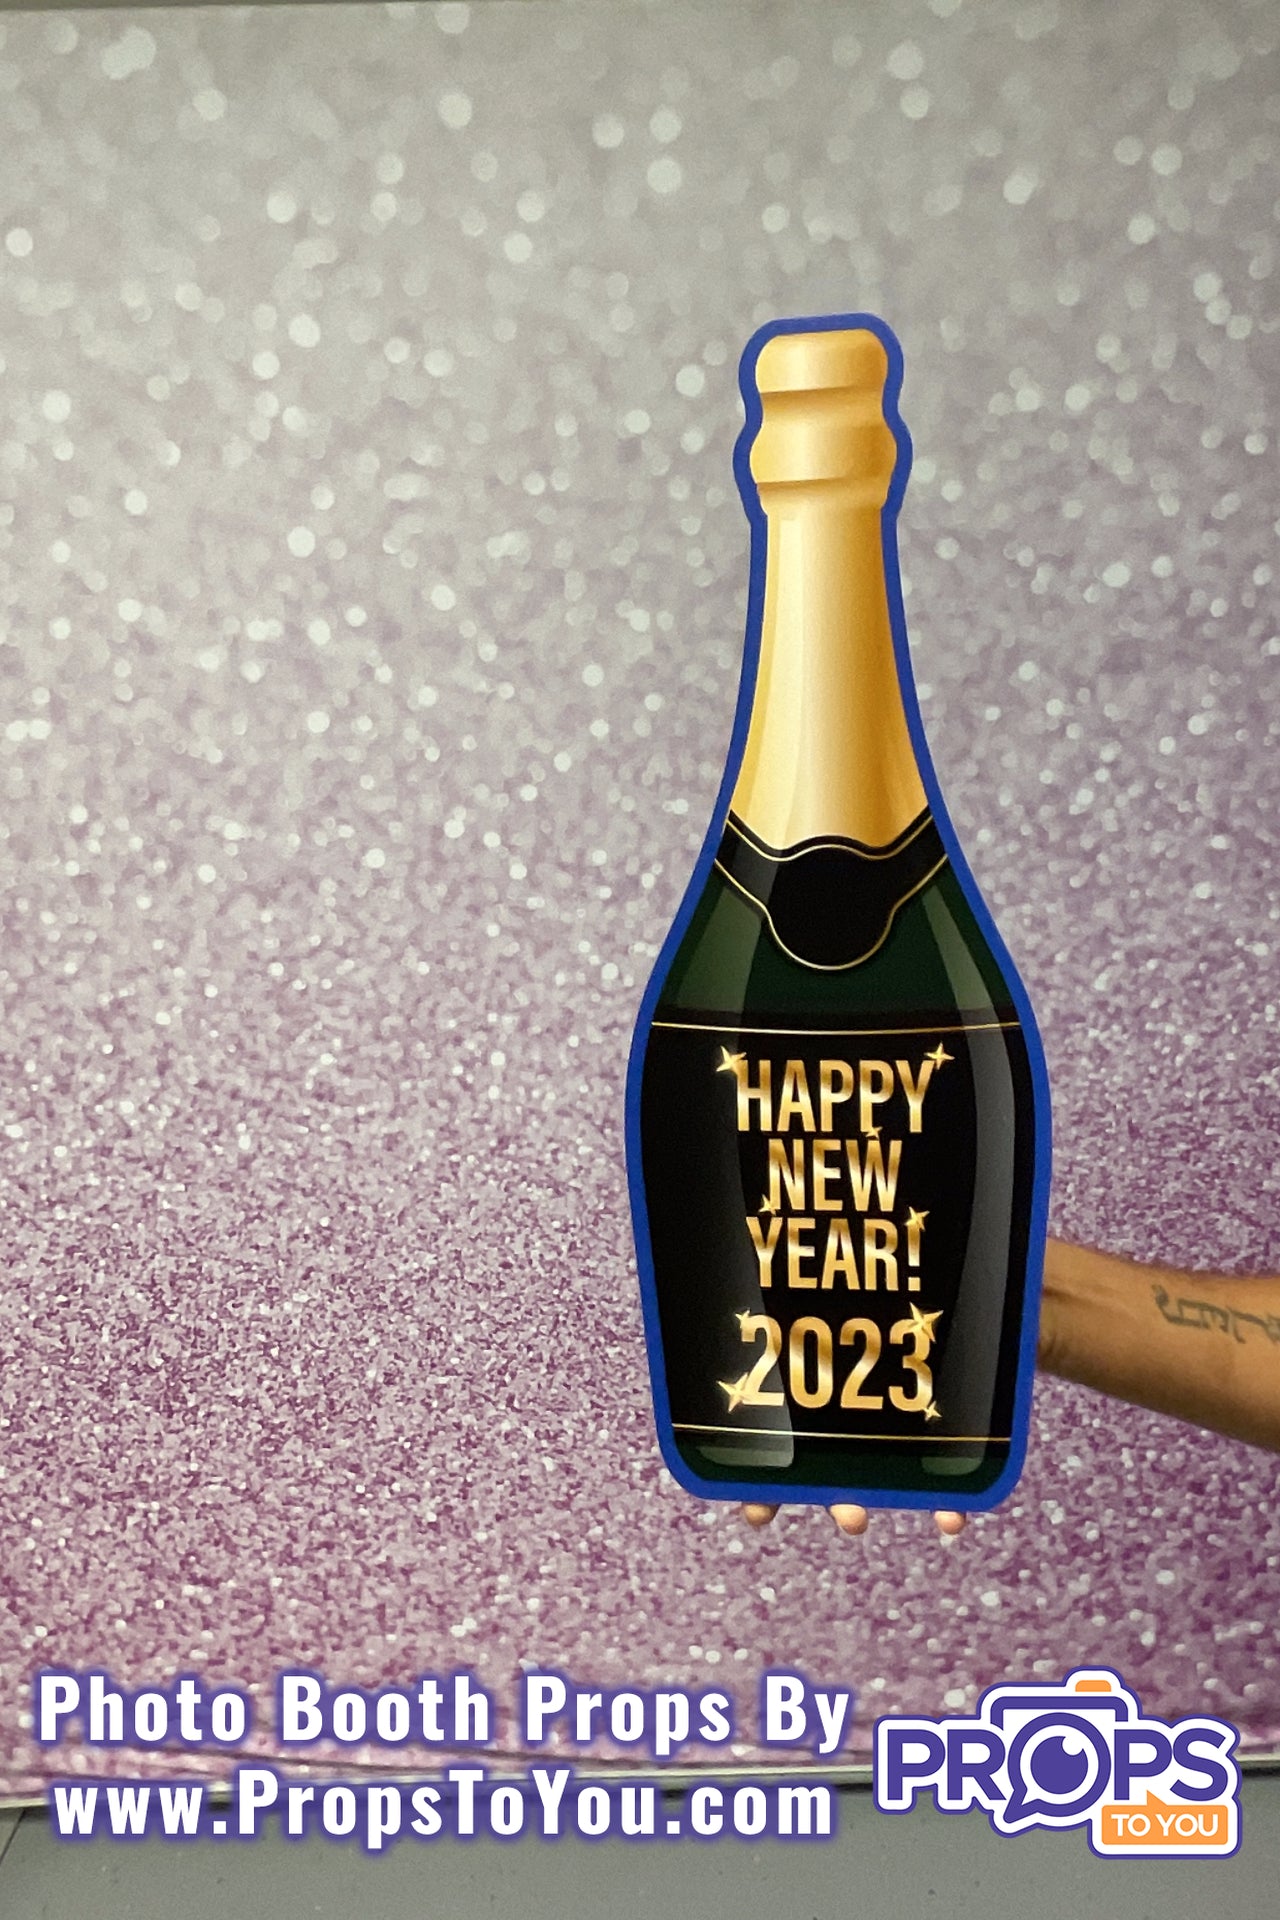 BIG Props: New Years - 2023! Gold Sparkling Wine Bottle Photo Booth Prop